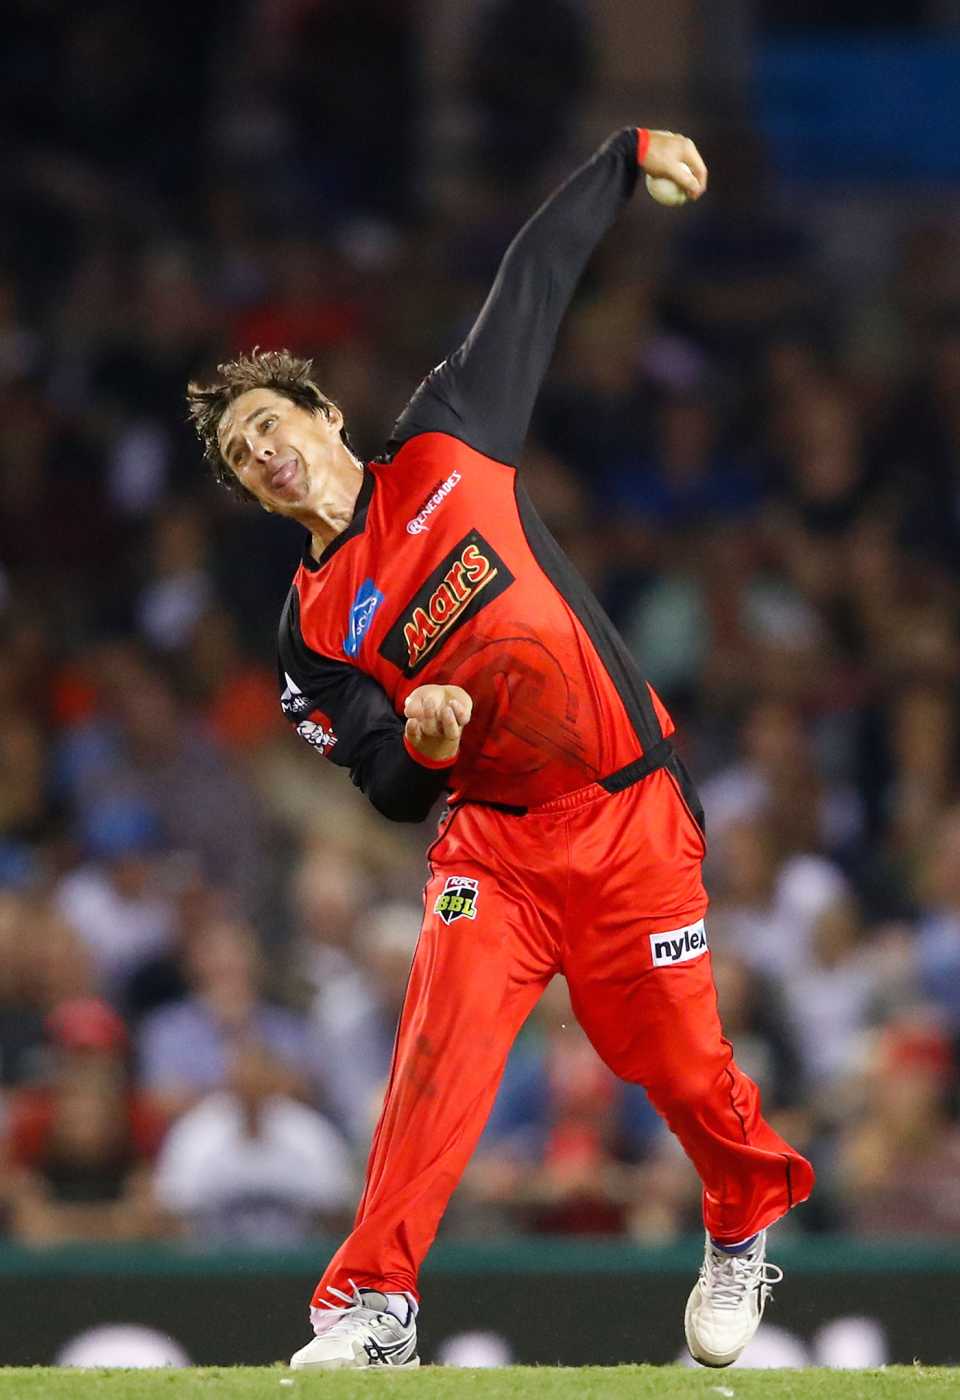 Brad Hogg picked up two wickets and only conceded 16 in his four overs